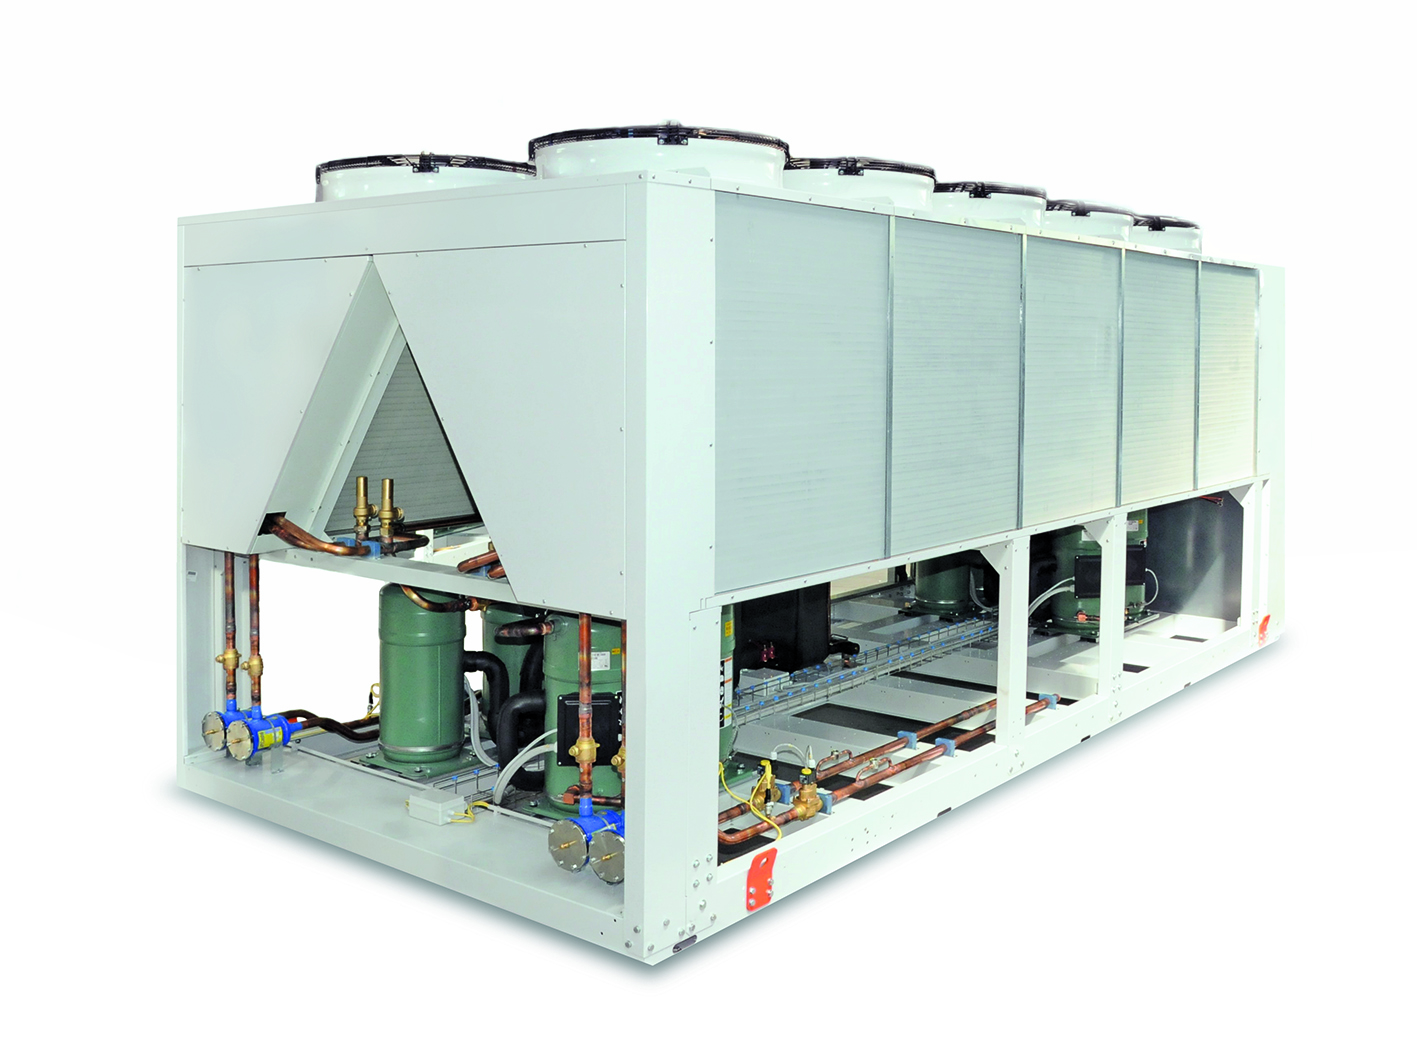 CHILLER SPECIAL SOLUTIONS